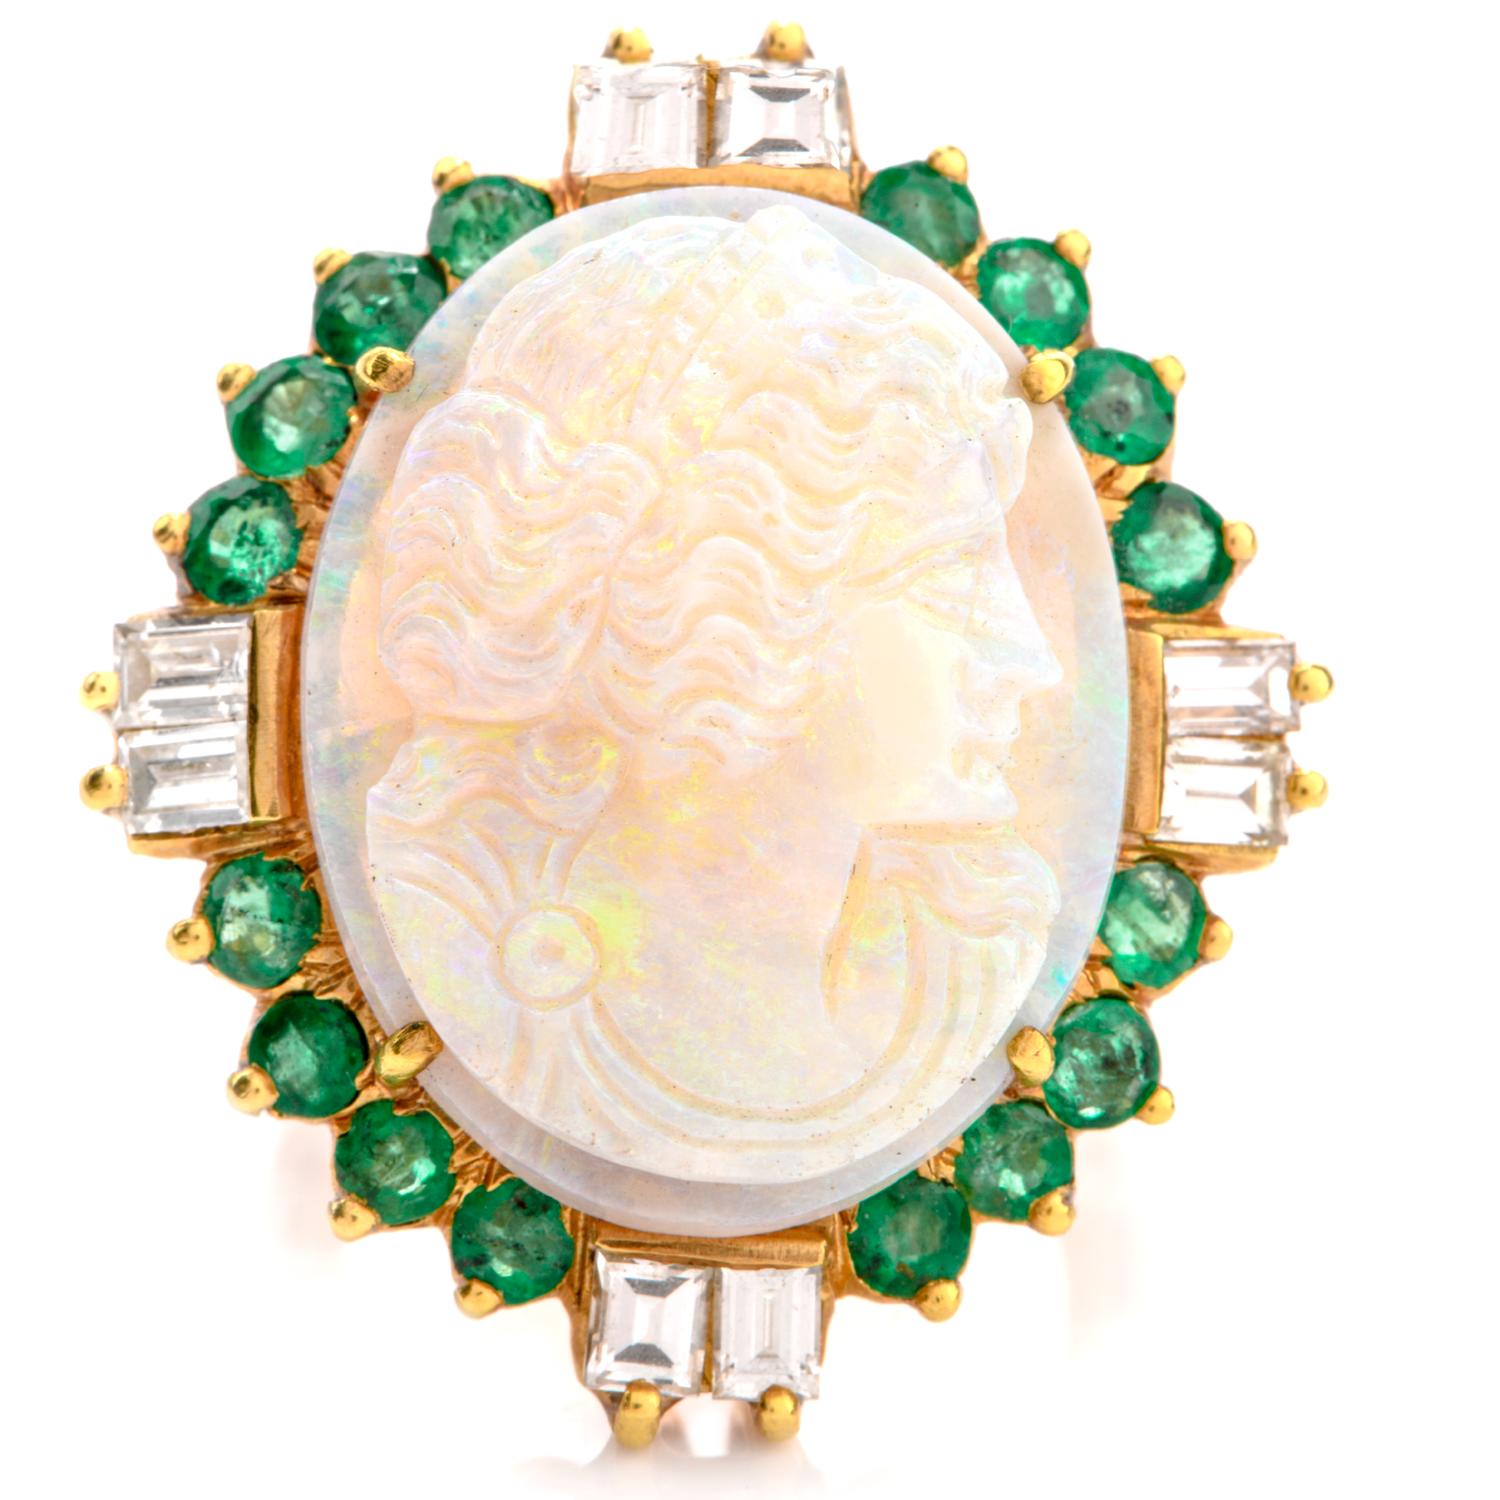 This vintage ring was inspired by the likeness of Tethys, the Titan goddess of 

the primal font of freshwater which nourishes the Earth.

Crafted in 18K gold, a carved silhouette of Tethys in an oval shaped

stone of genuine Opal adorns the center